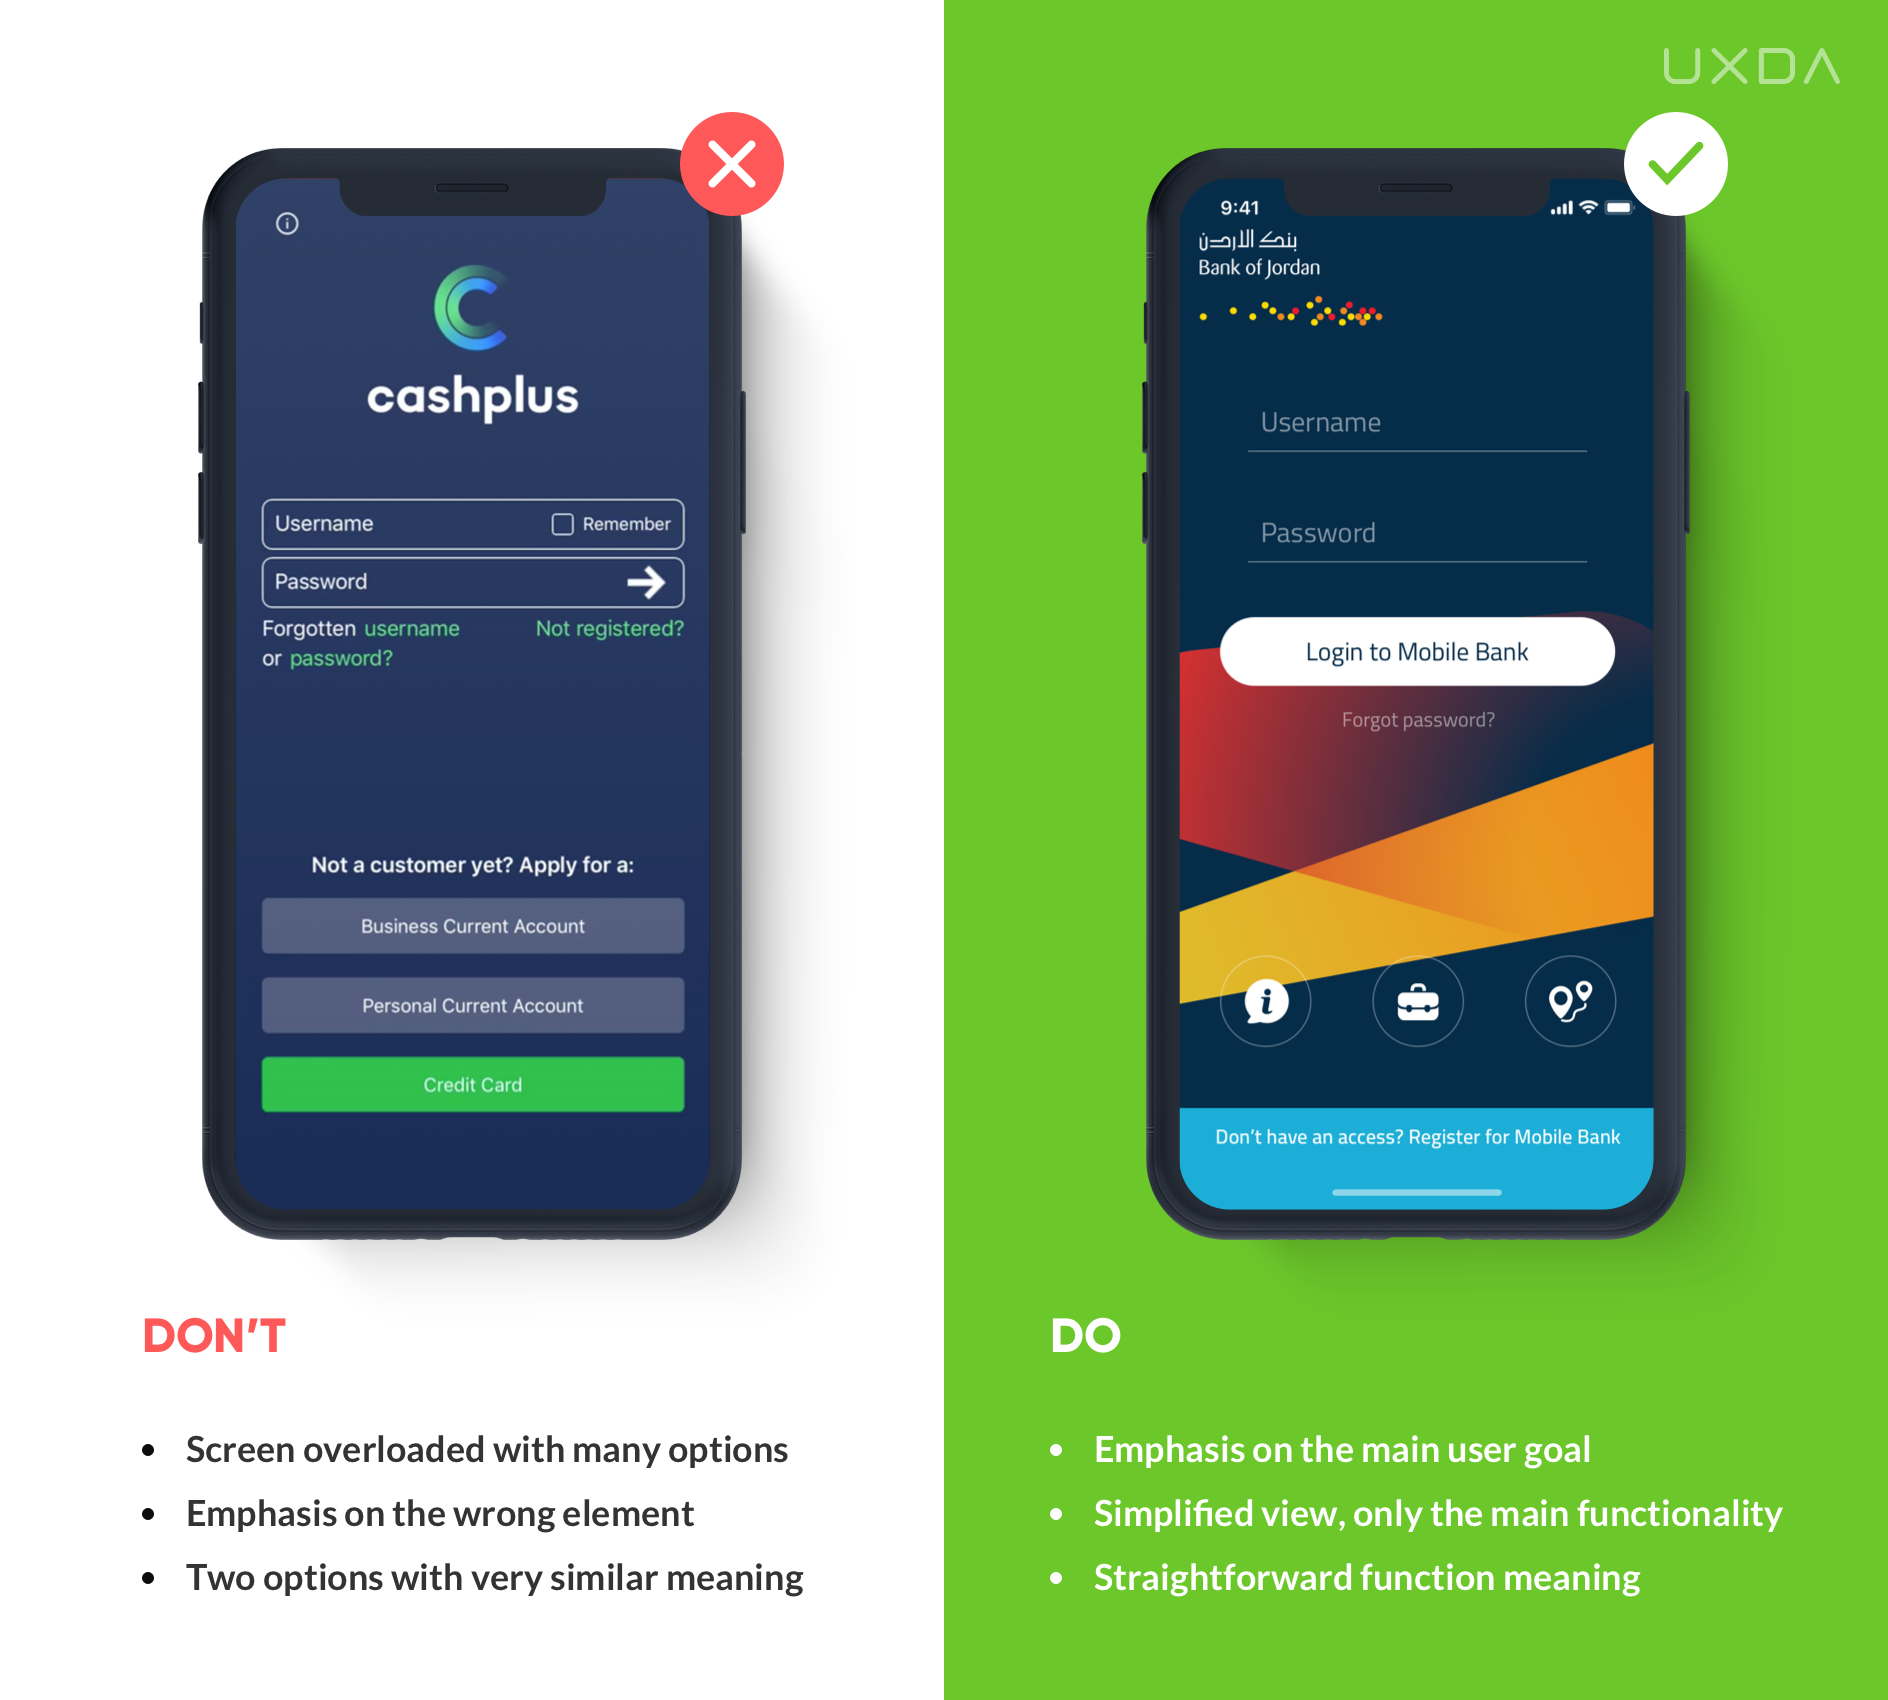 Fintech UX / UI Guide: TOP 20 Tips to Improve Mobile Banking Solutions Design - Smooth login